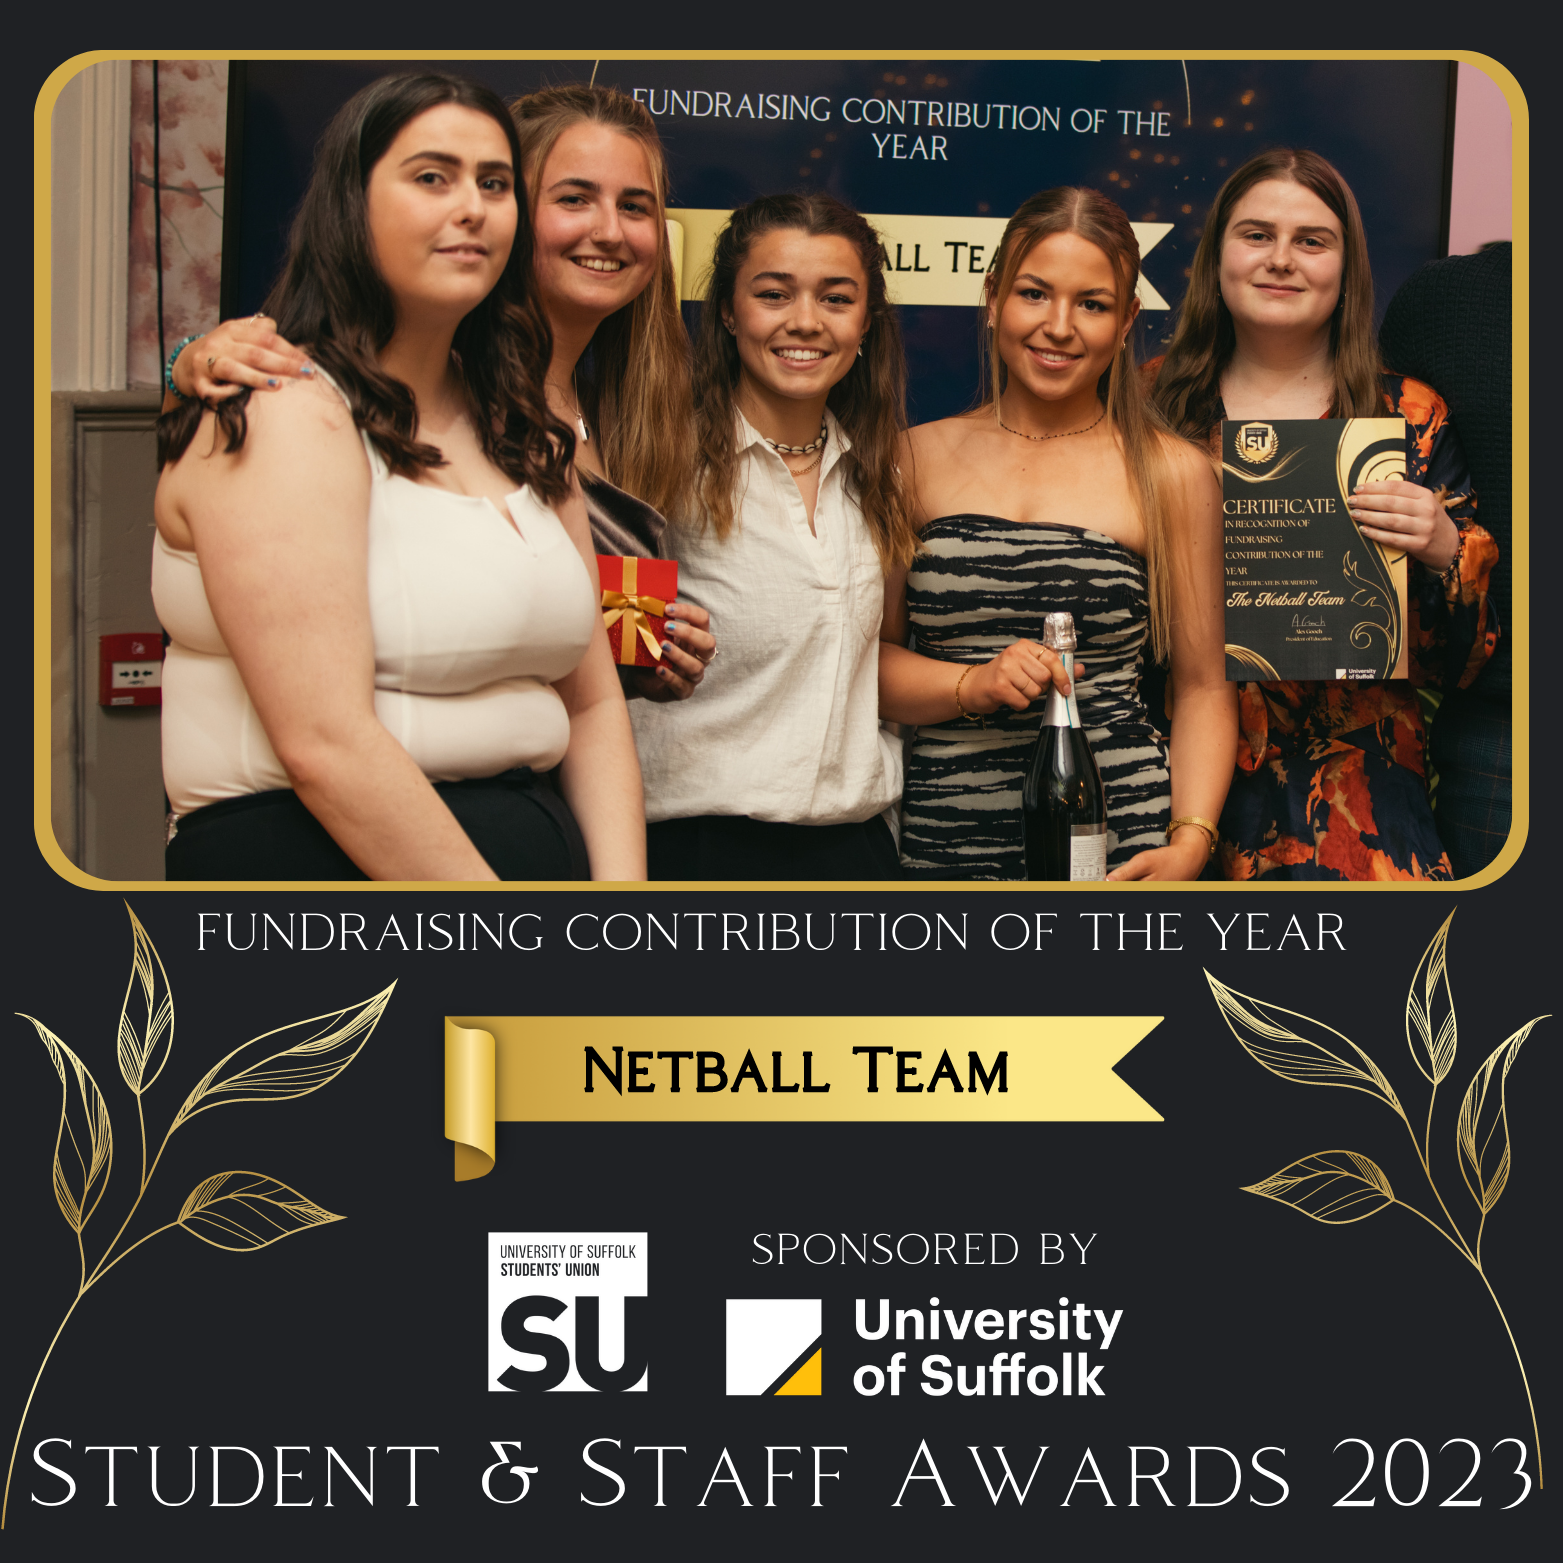 fundraising contribution of the year, netball team, pictured netball team holding their certificate